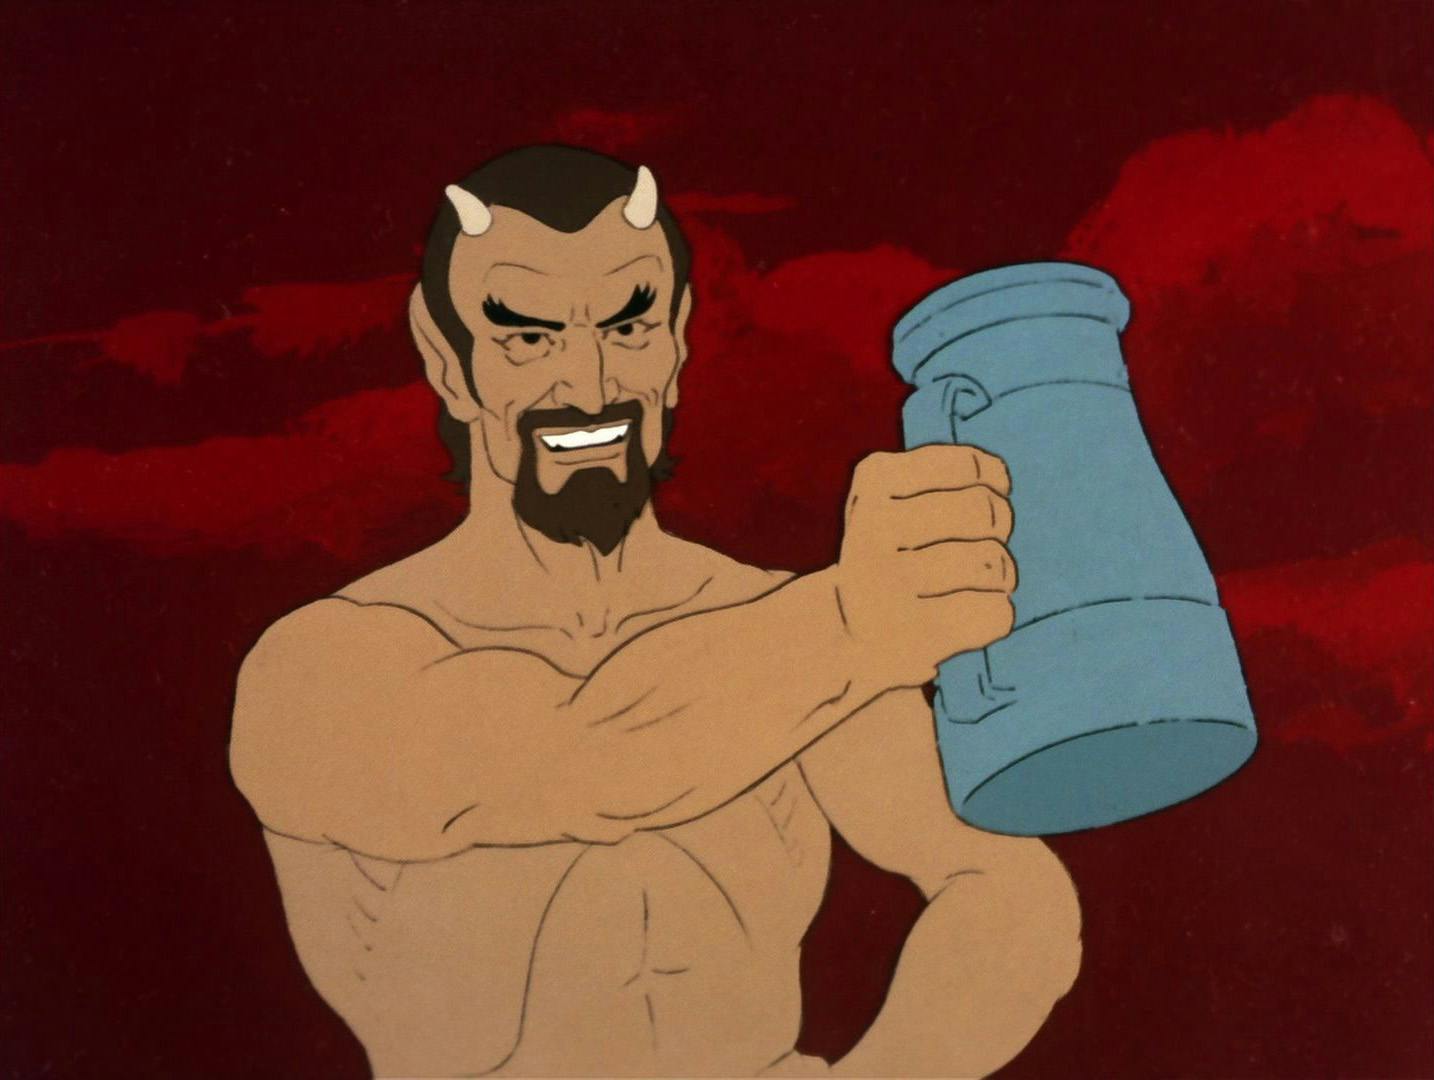 After Kirk defends Lucien aka Lucifer from the Megans, they're all granted their freedom. To celebrate, Lucien lifts up a stein to toast to their new friendship in 'The Magicks of Megas-Tu'